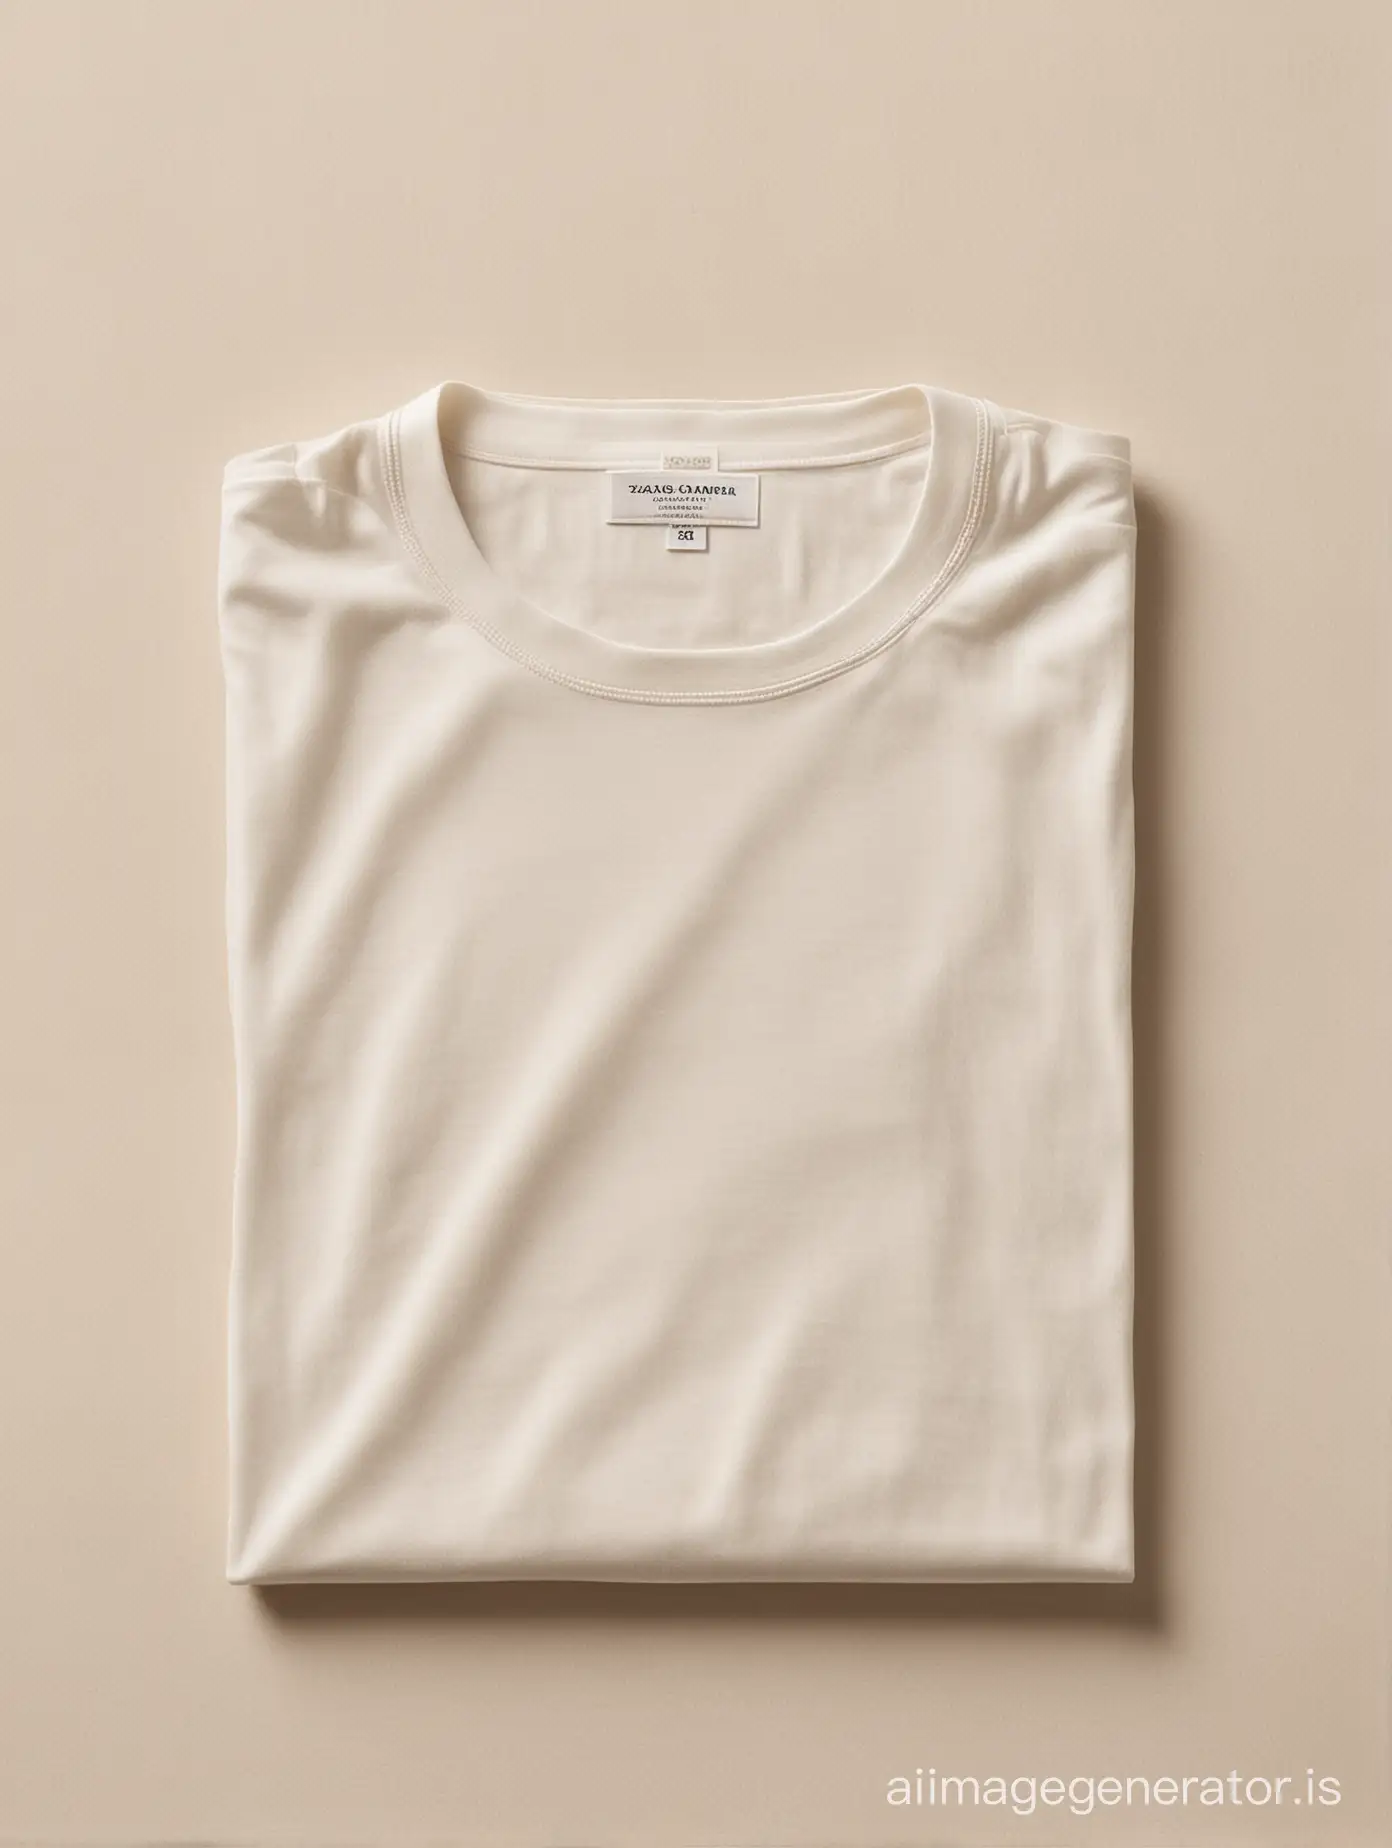 A high-resolution photo of a perfectly folded flat square white cotton t-shirt with one white label, styled for a Zara brand catalog. Warm natural sunlight streams in from the left side of the image, highlighting the rich texture  of the natural fabric. The t-shirt should be meticulously folded into a square, with sharp edges and no wrinkles or imperfections. Imagine the fold as a series of precise rectangles stacked upon each other, creating a flawless geometric form. Maintain a minimalist, clean background for a polished look. Highly textured cotton.